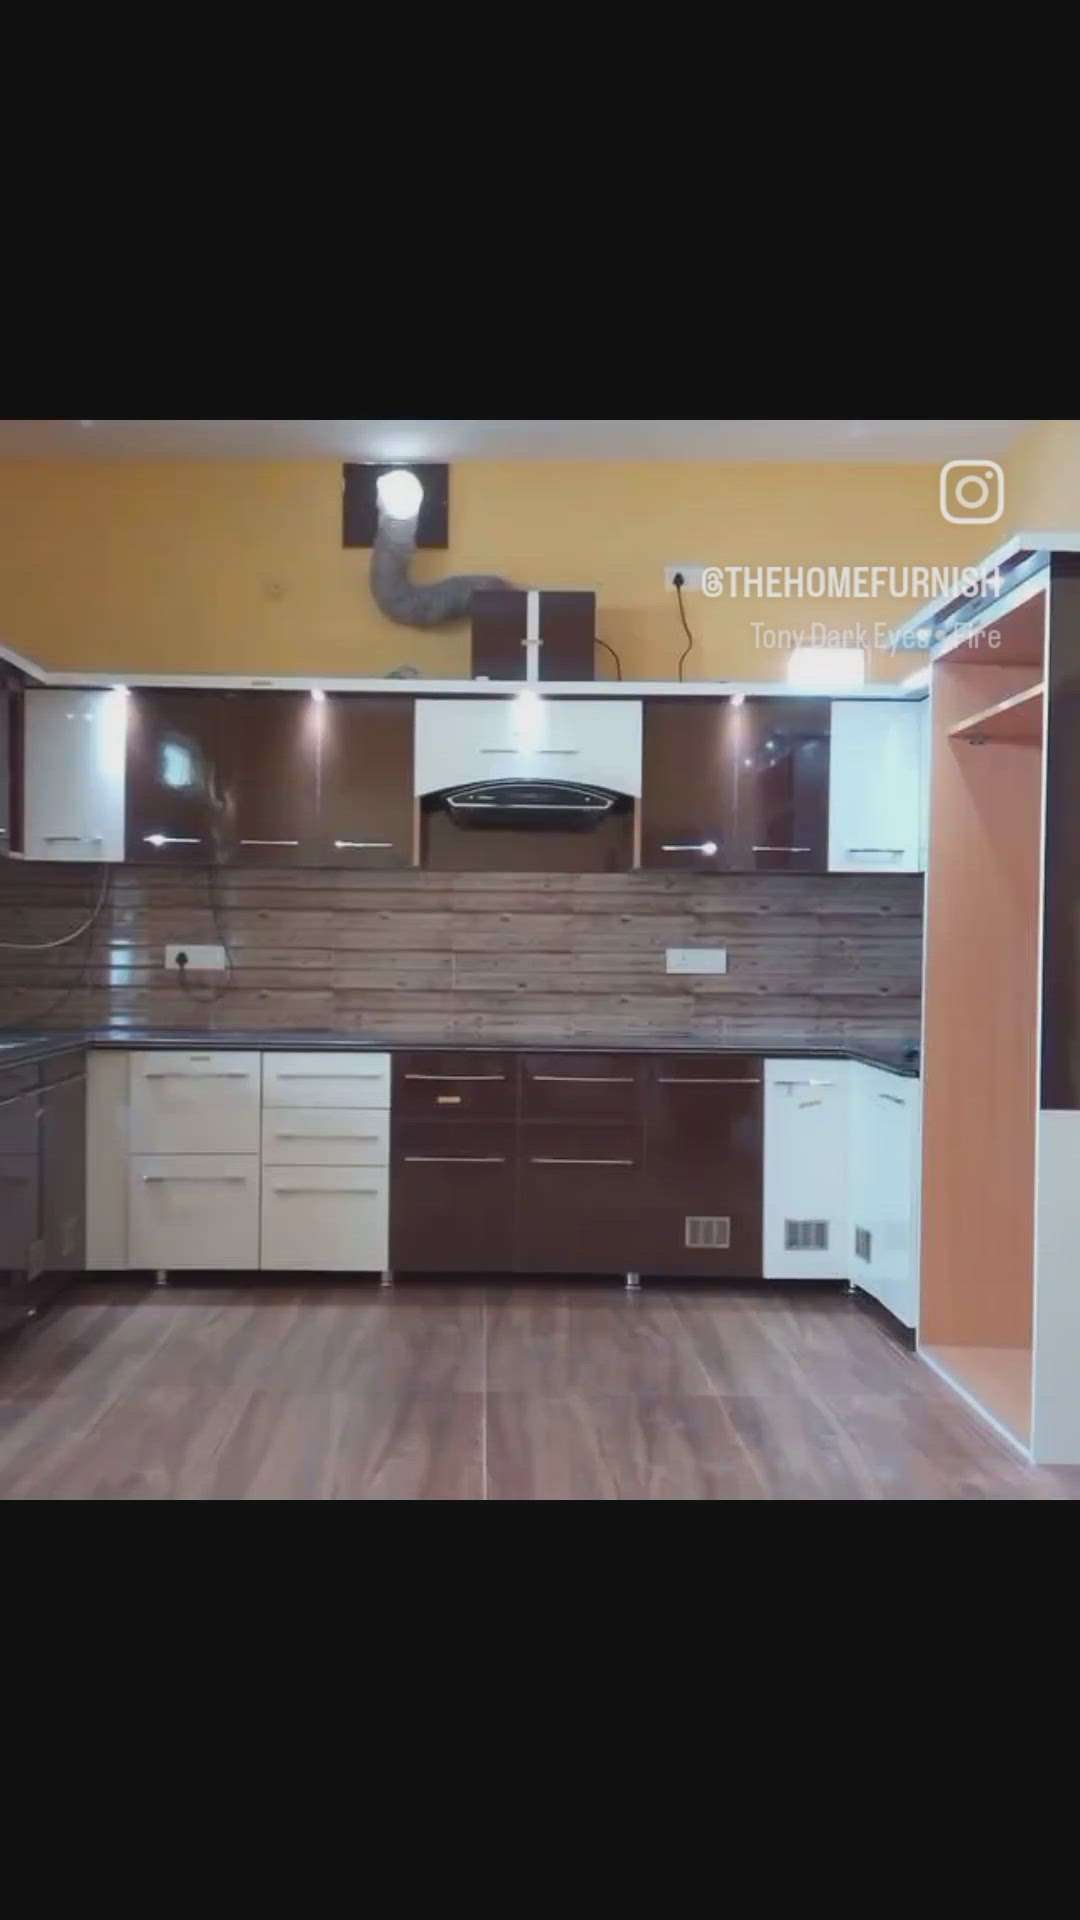 Next Generation Kitchen! Indian Style...Exclusive collection of Modular Kitchen designs at THE HOME FURNISH.  Explore the latest modular kitchen designs & consultations. Inquiry Please Contact! https://wa.me/c/917018317671
#kitchen #modularkitchen #chimney #kitchendesign #kitcheninteriordesign #kitchendesignideas  #interiordesigner #interiordesigner #interiordecorating #interiordesign #interiors #architecture #architecturedesign #thehomefurnish
7018317671